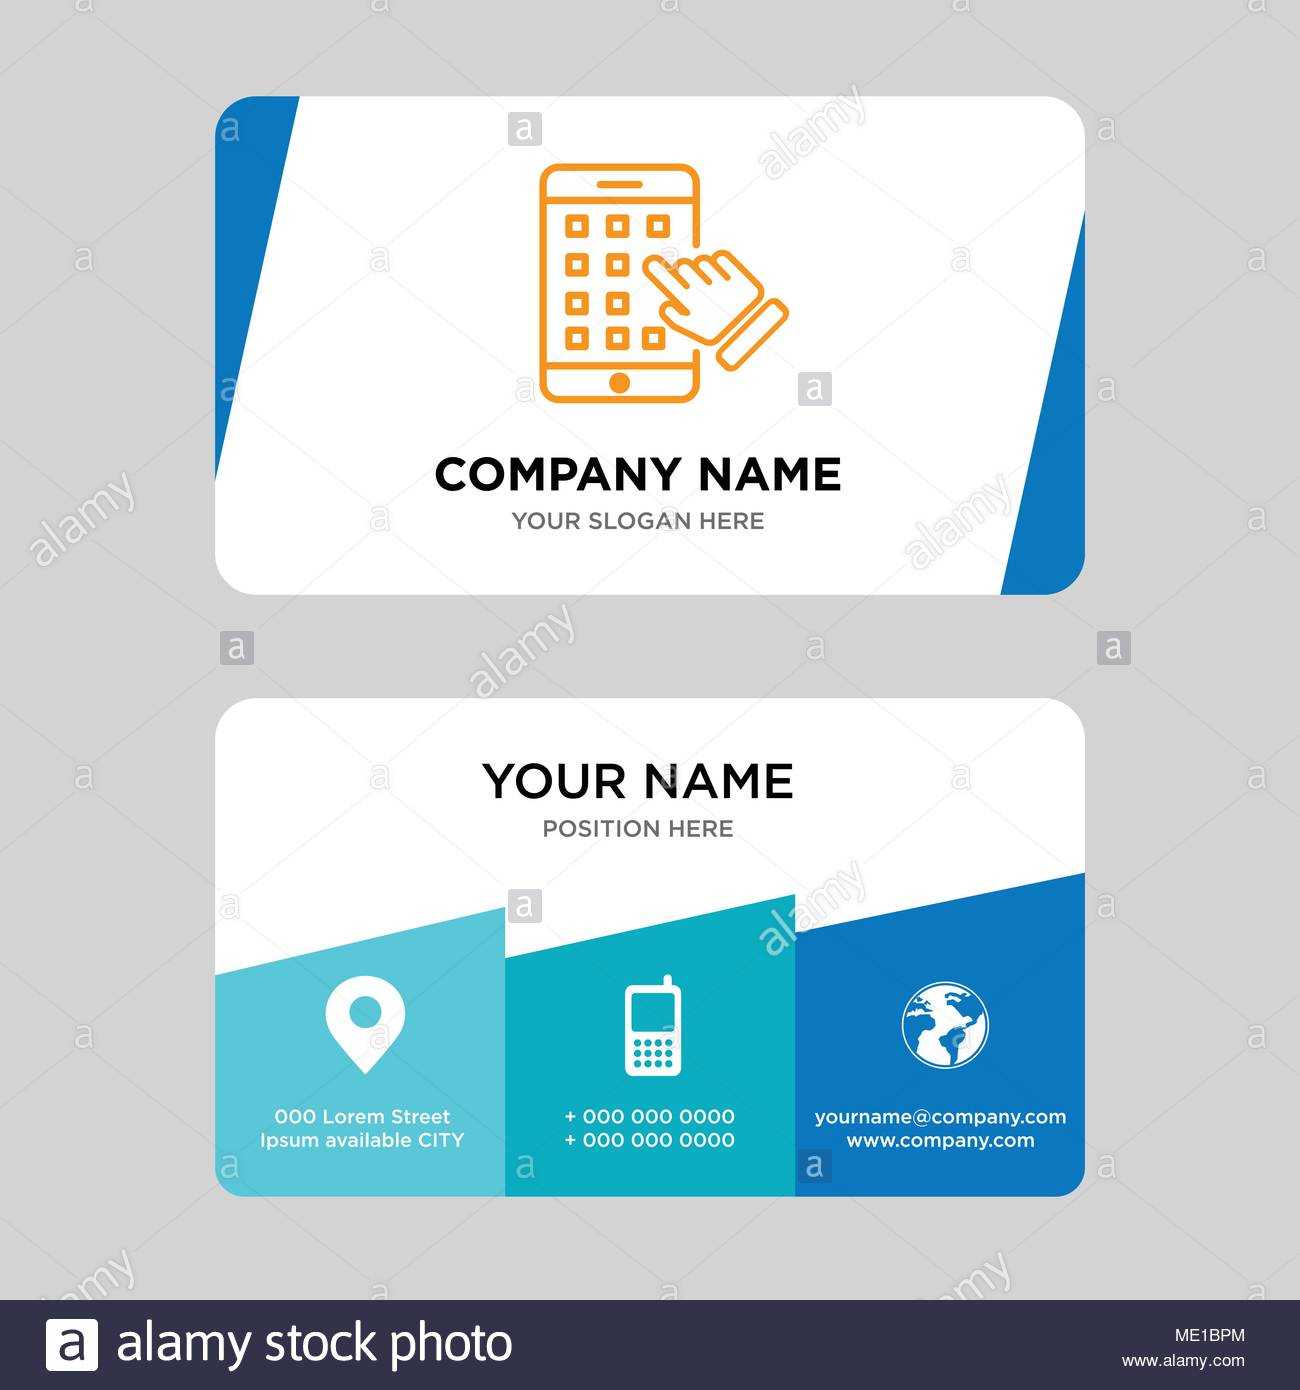 Iphone Business Card Design Template, Visiting For Your Regarding Iphone Business Card Template